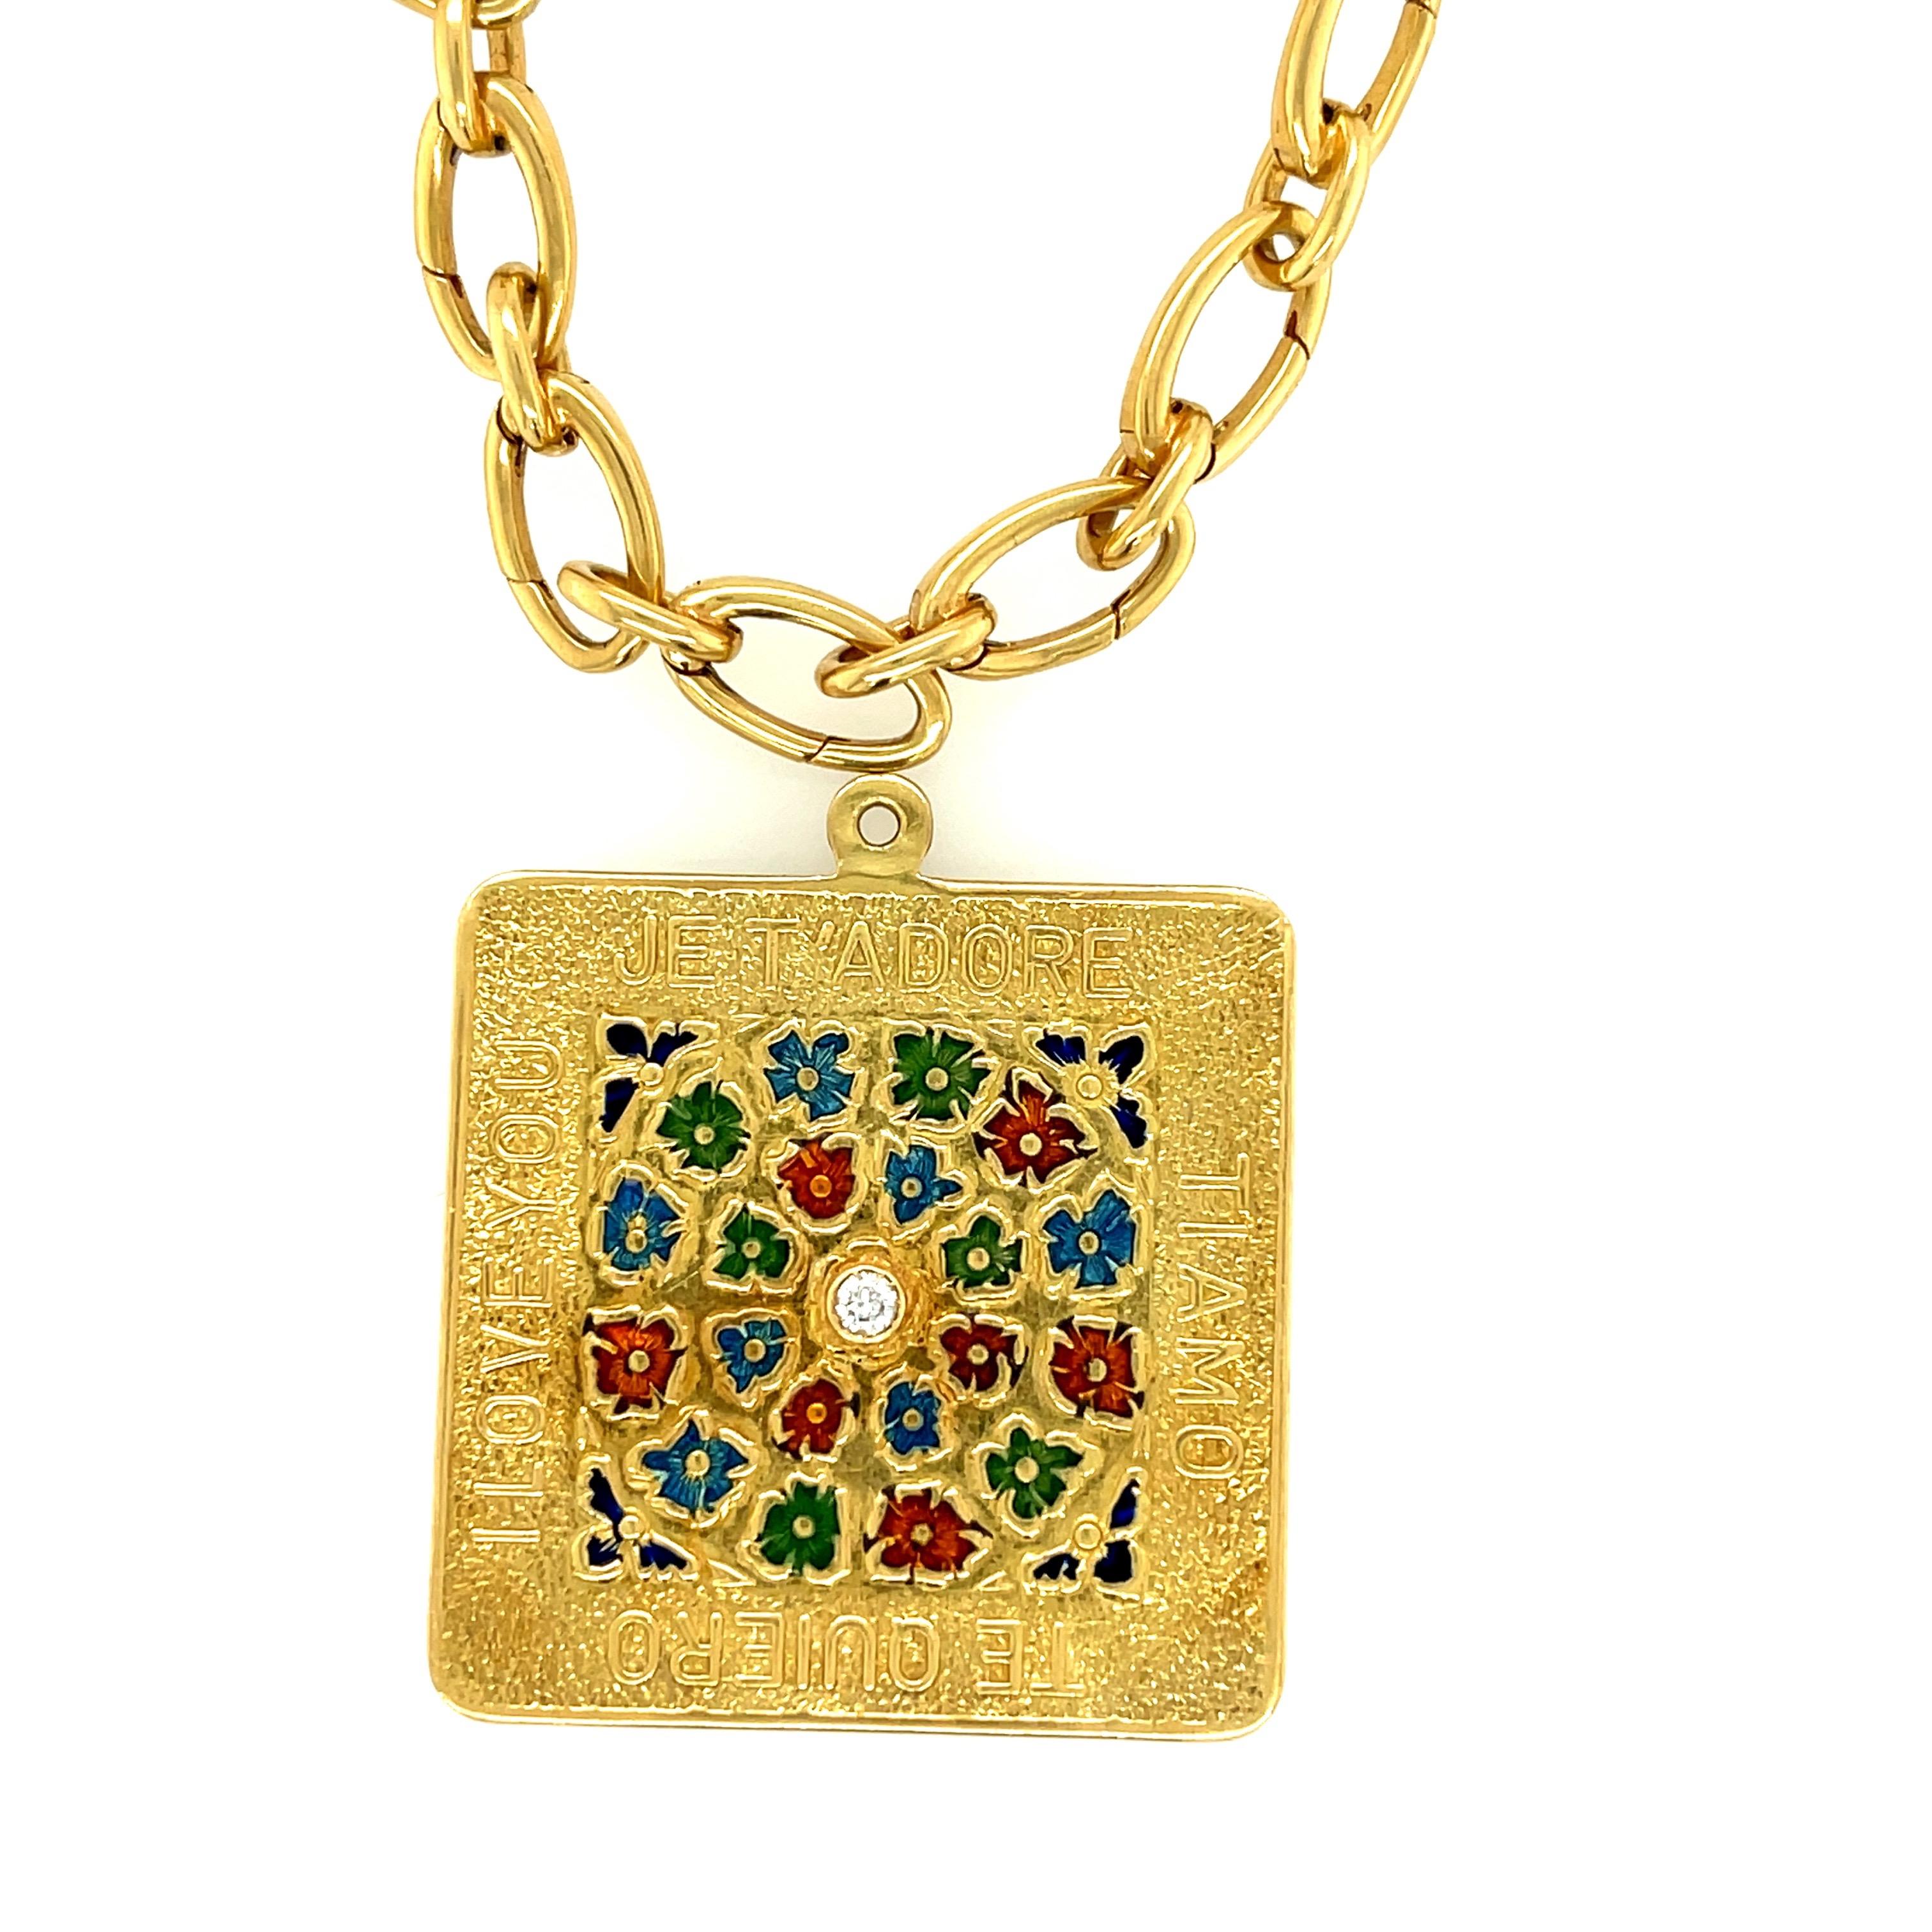 A collectible vintage square charm with 